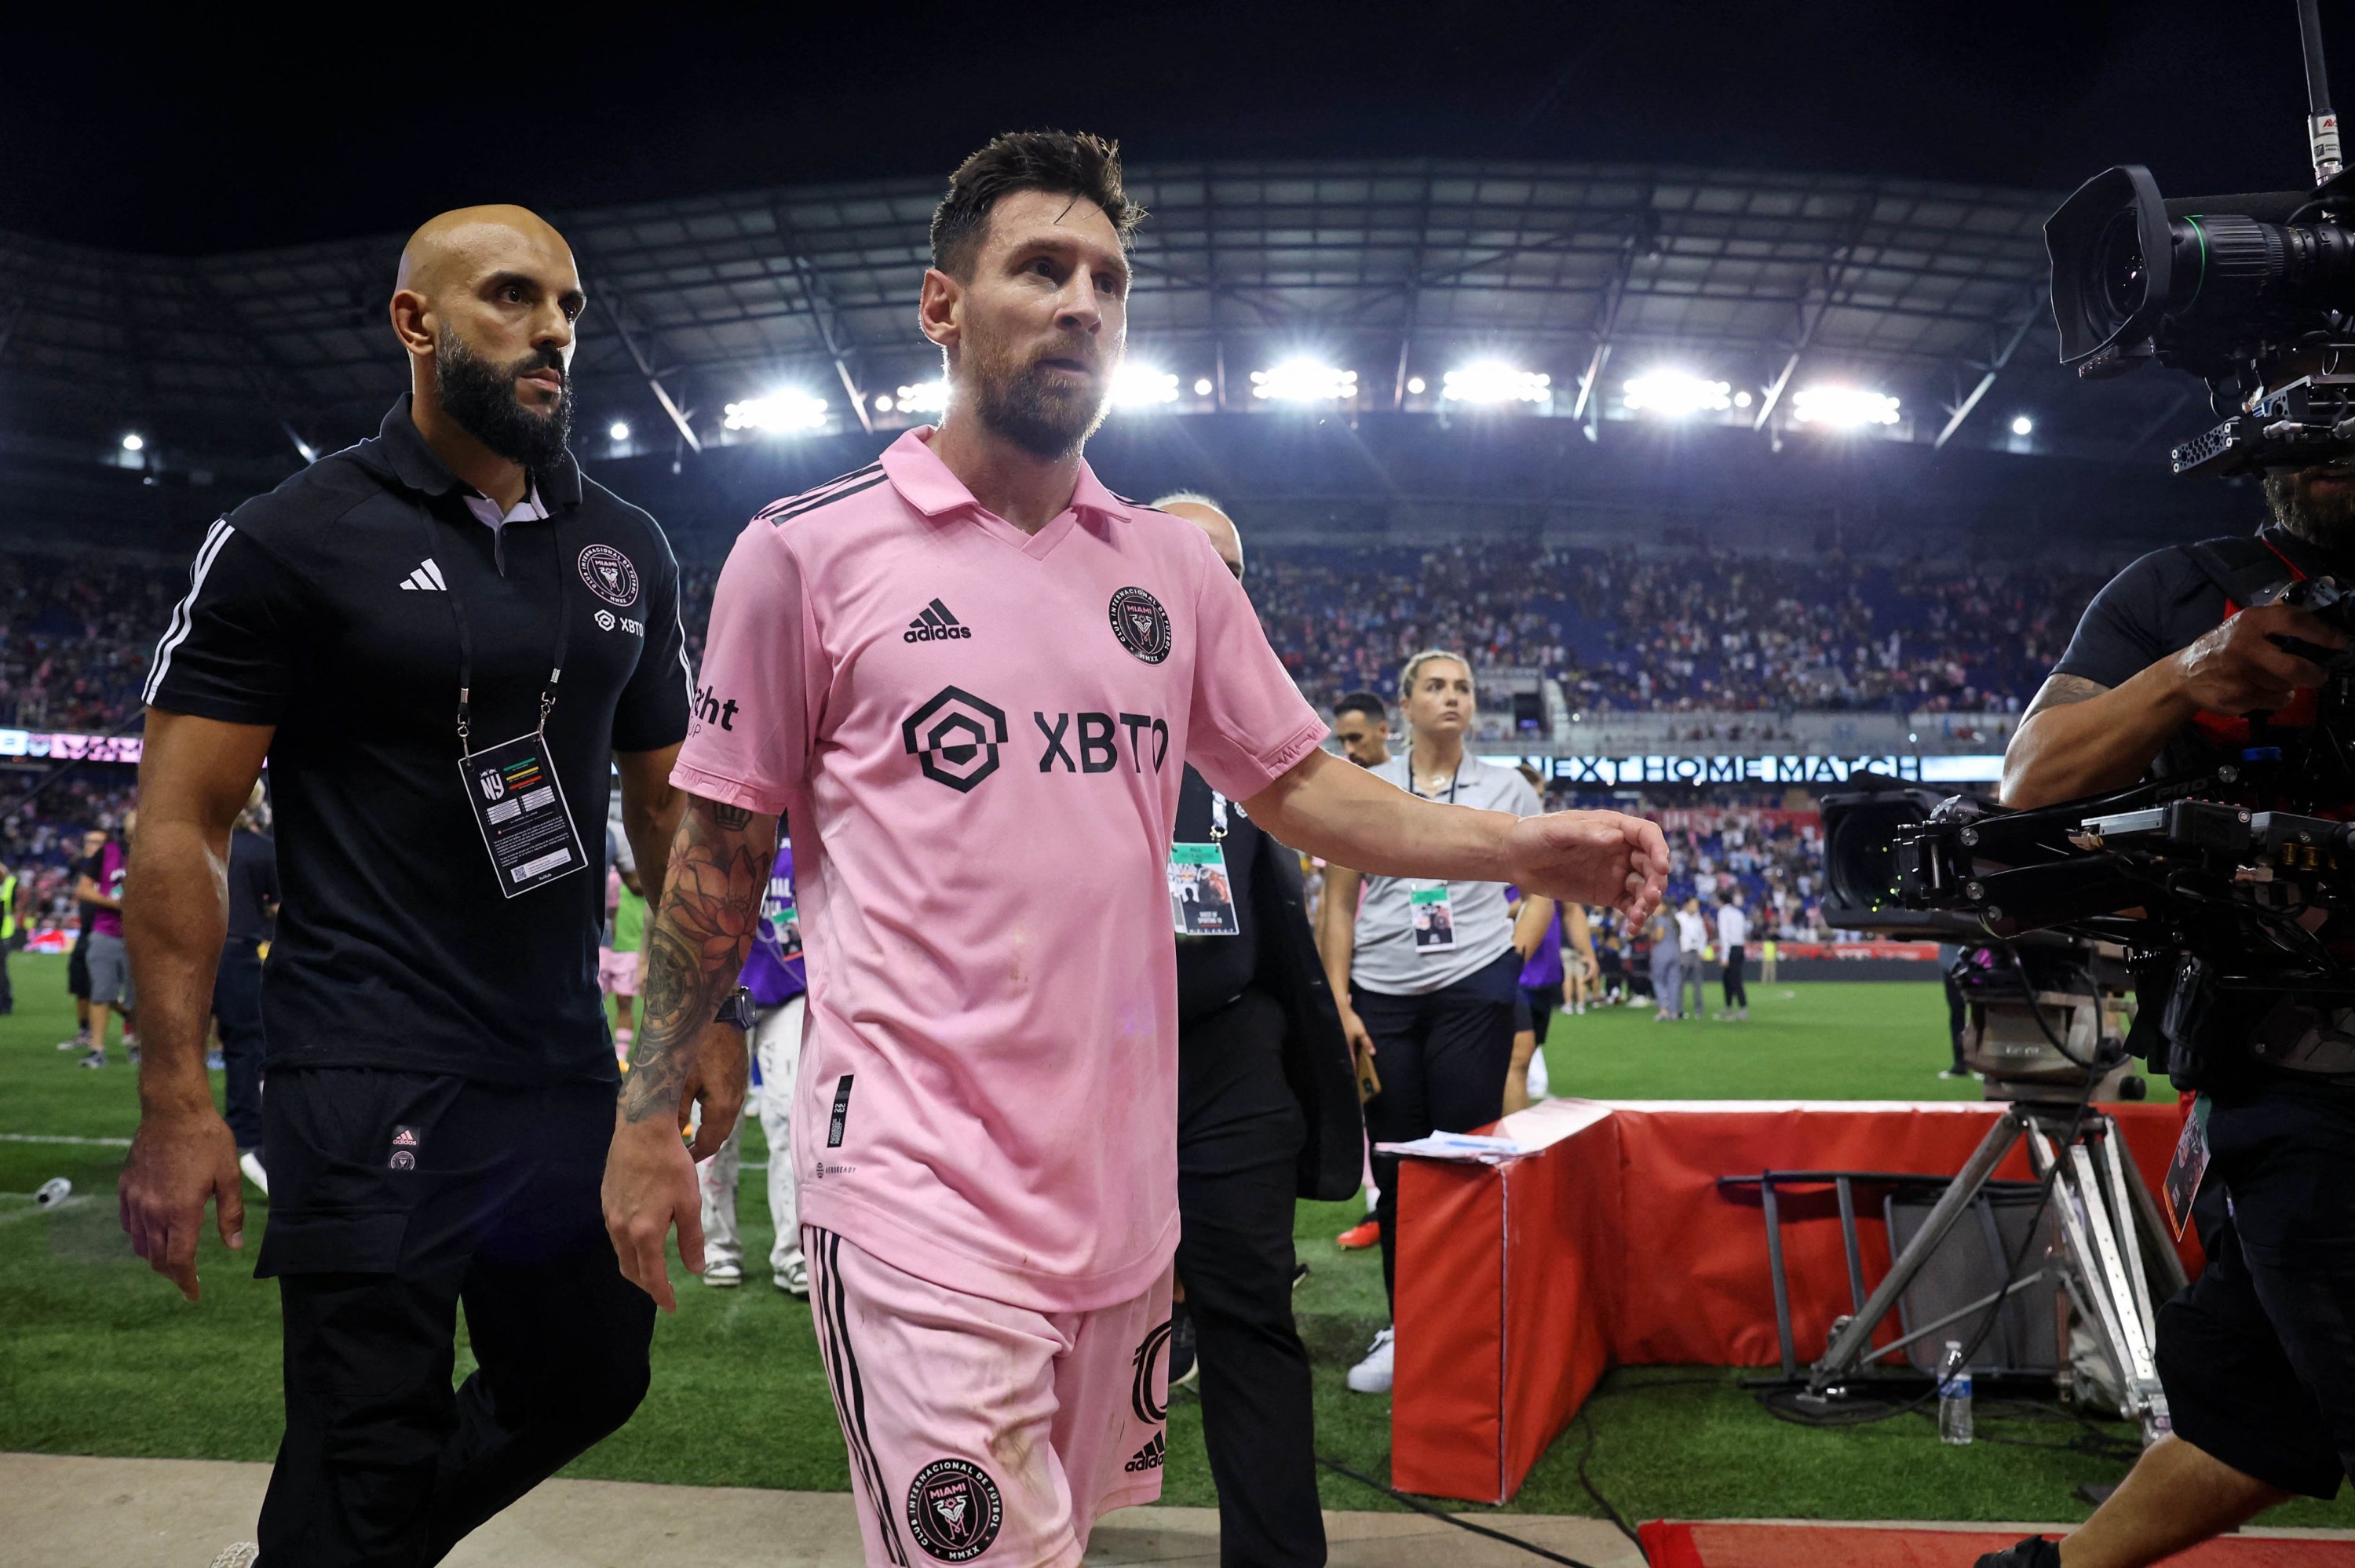 Lionel Messi and Inter Miami vs. Red Bulls in New Jersey